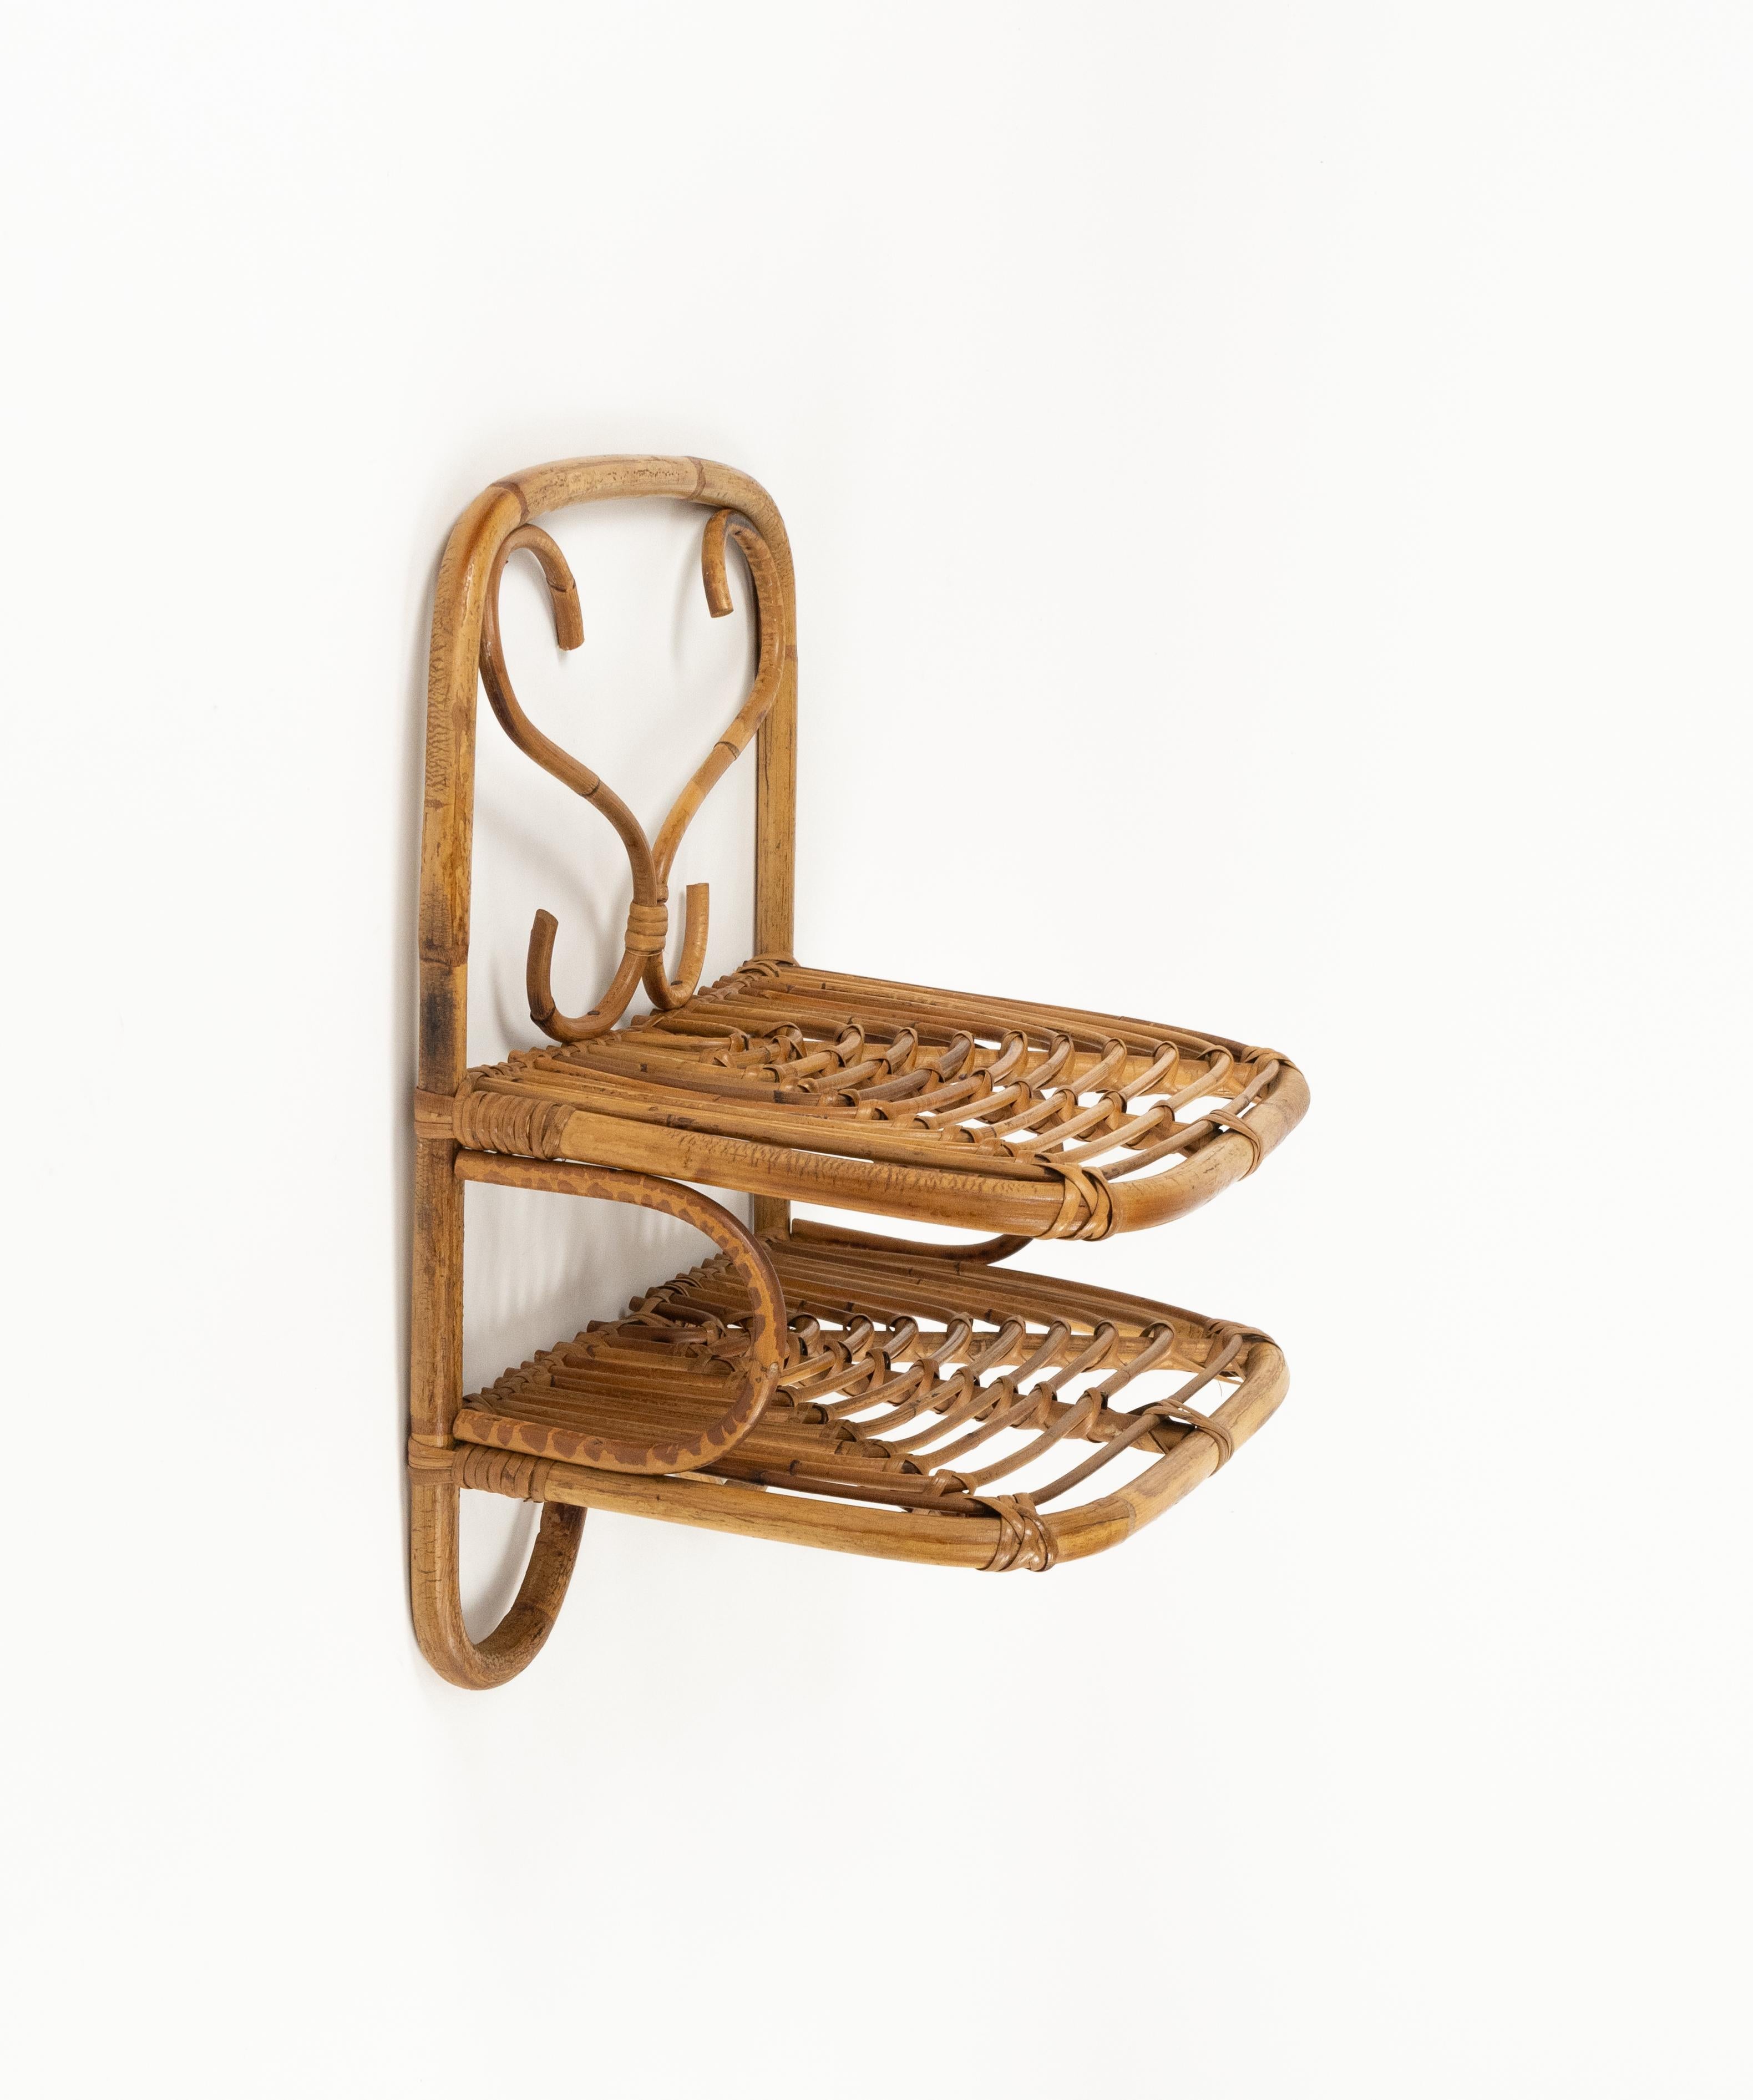 Rattan & Bamboo Wall Shelf or Hanging Side Table Franco Albini Style Italy 1960s For Sale 3